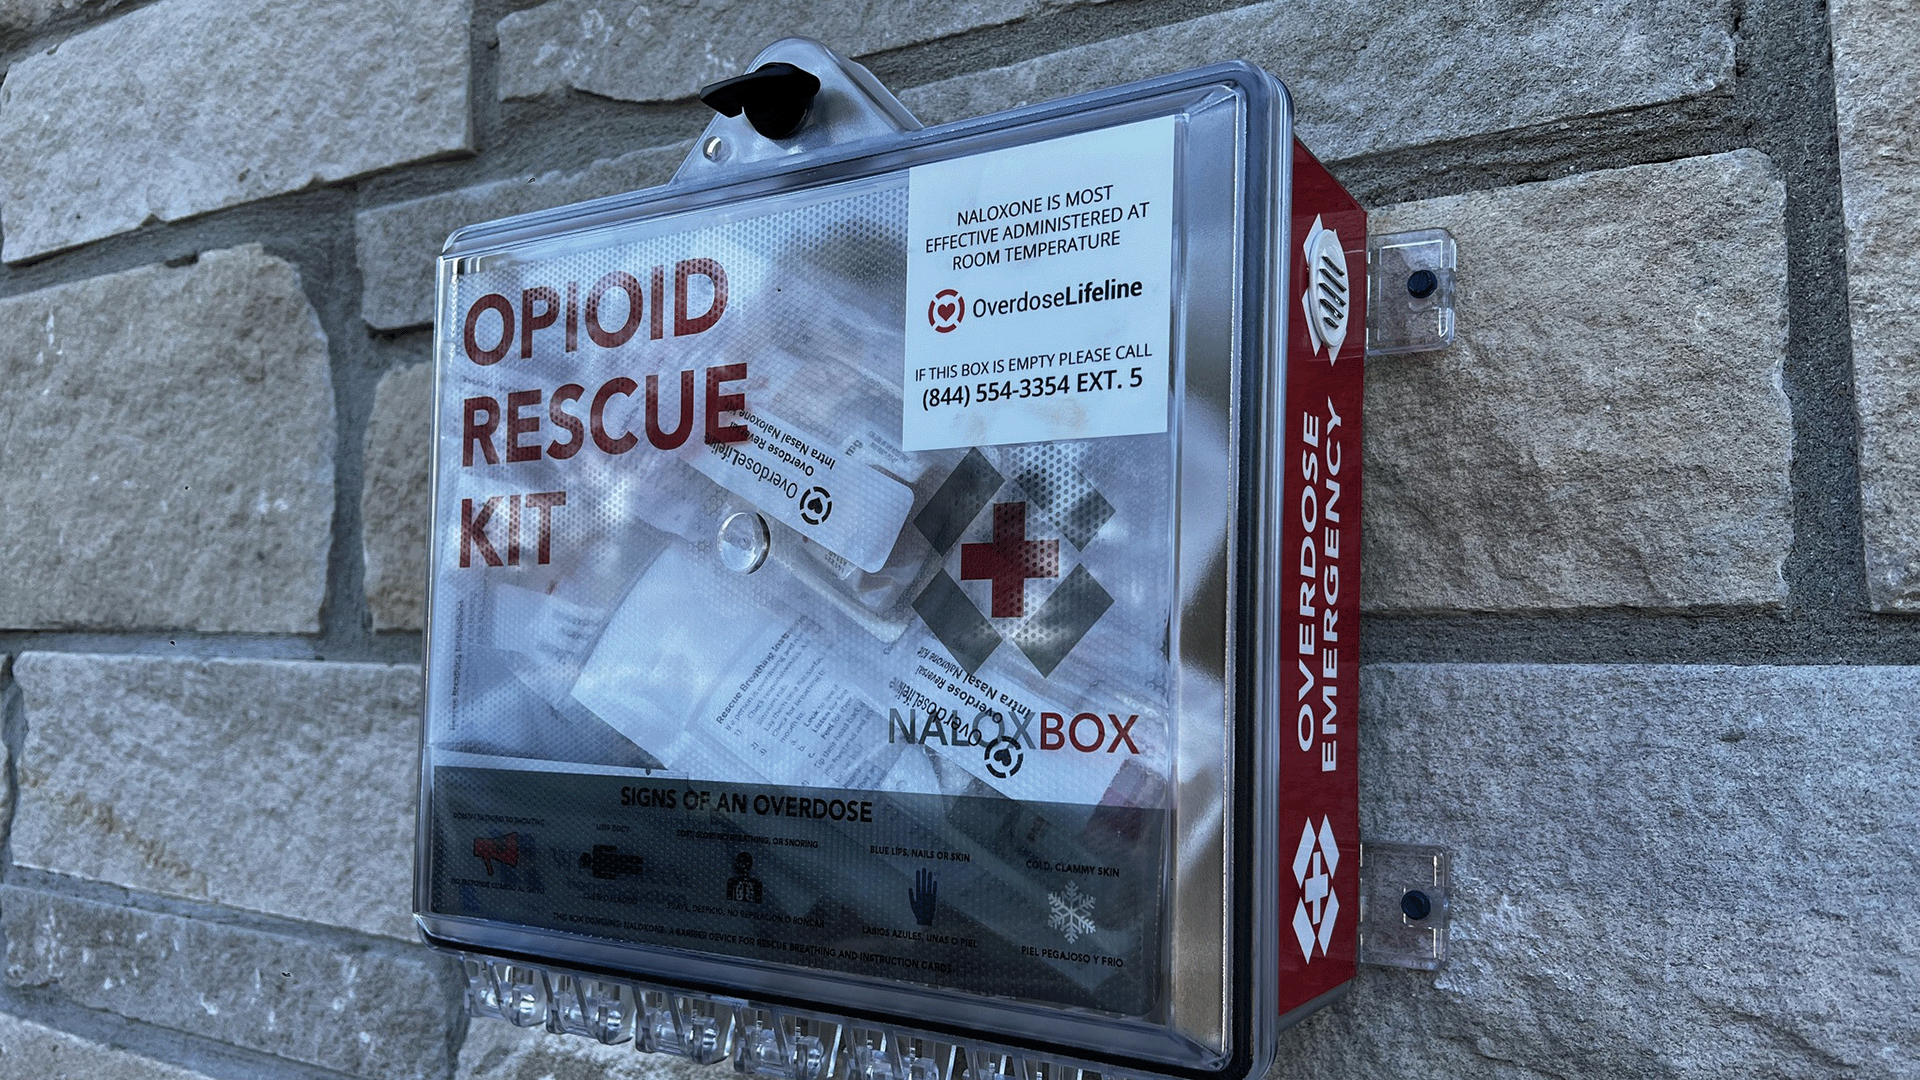 NaloxBoxes installed at Monroe Fire Protection District fire stations